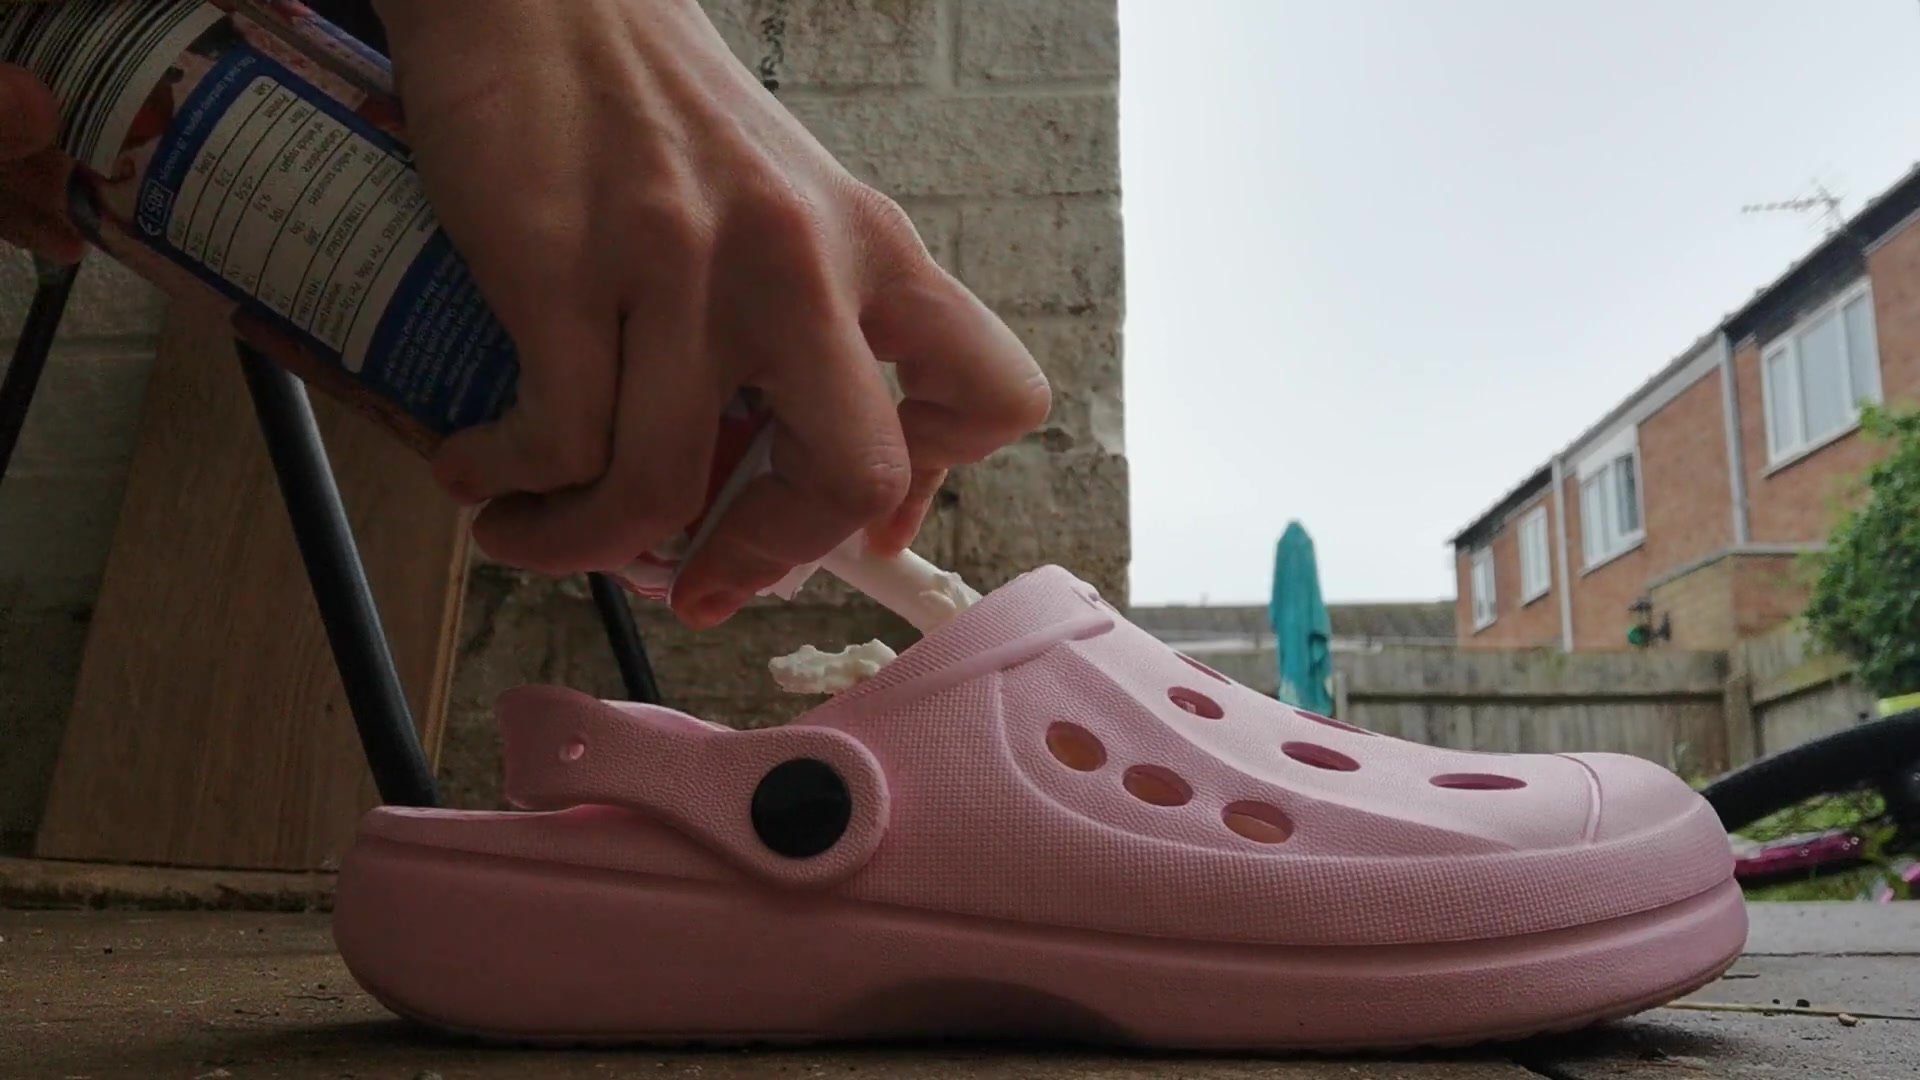 Girl putting cream into her shoes